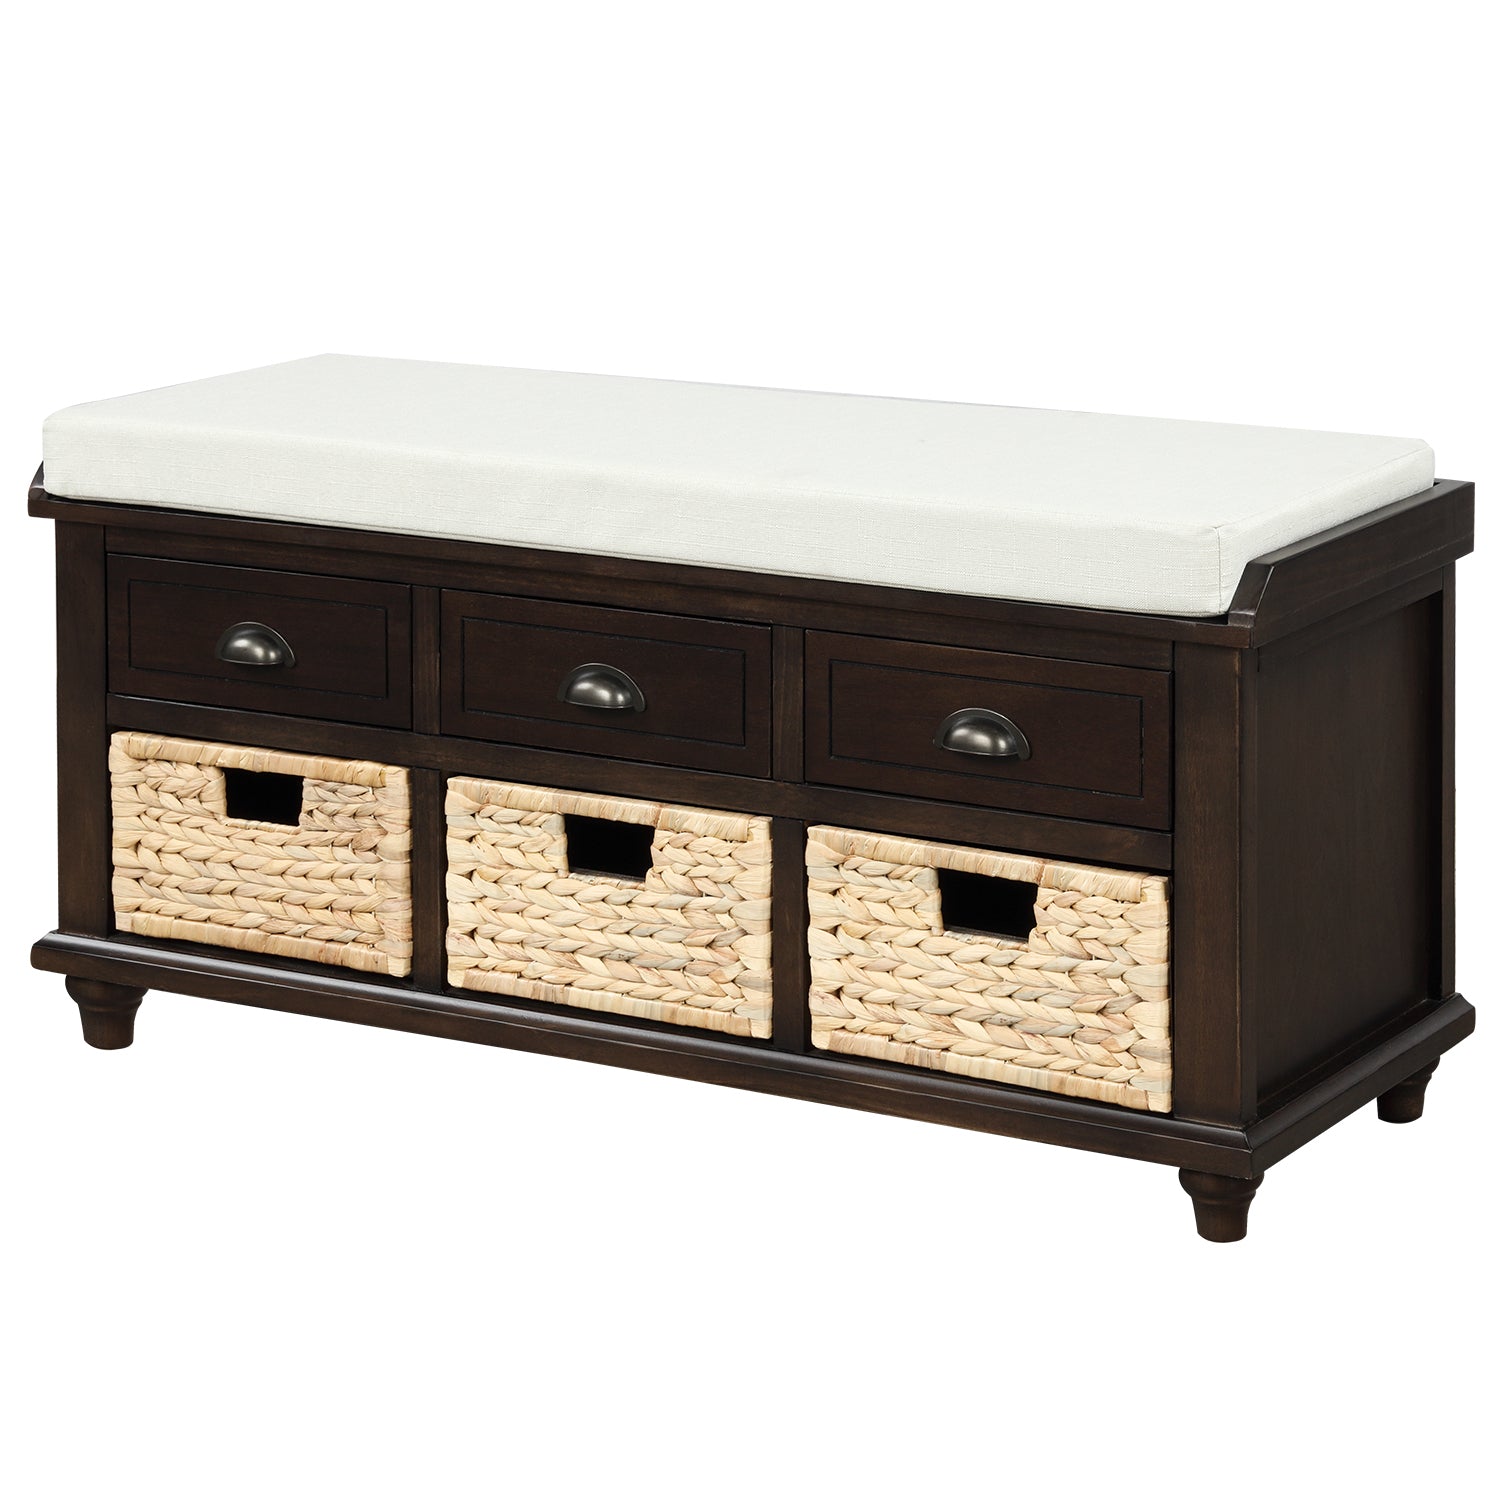 TREXM Rustic Storage Bench with 3 Drawers and 3 Rattan Baskets - Espresso